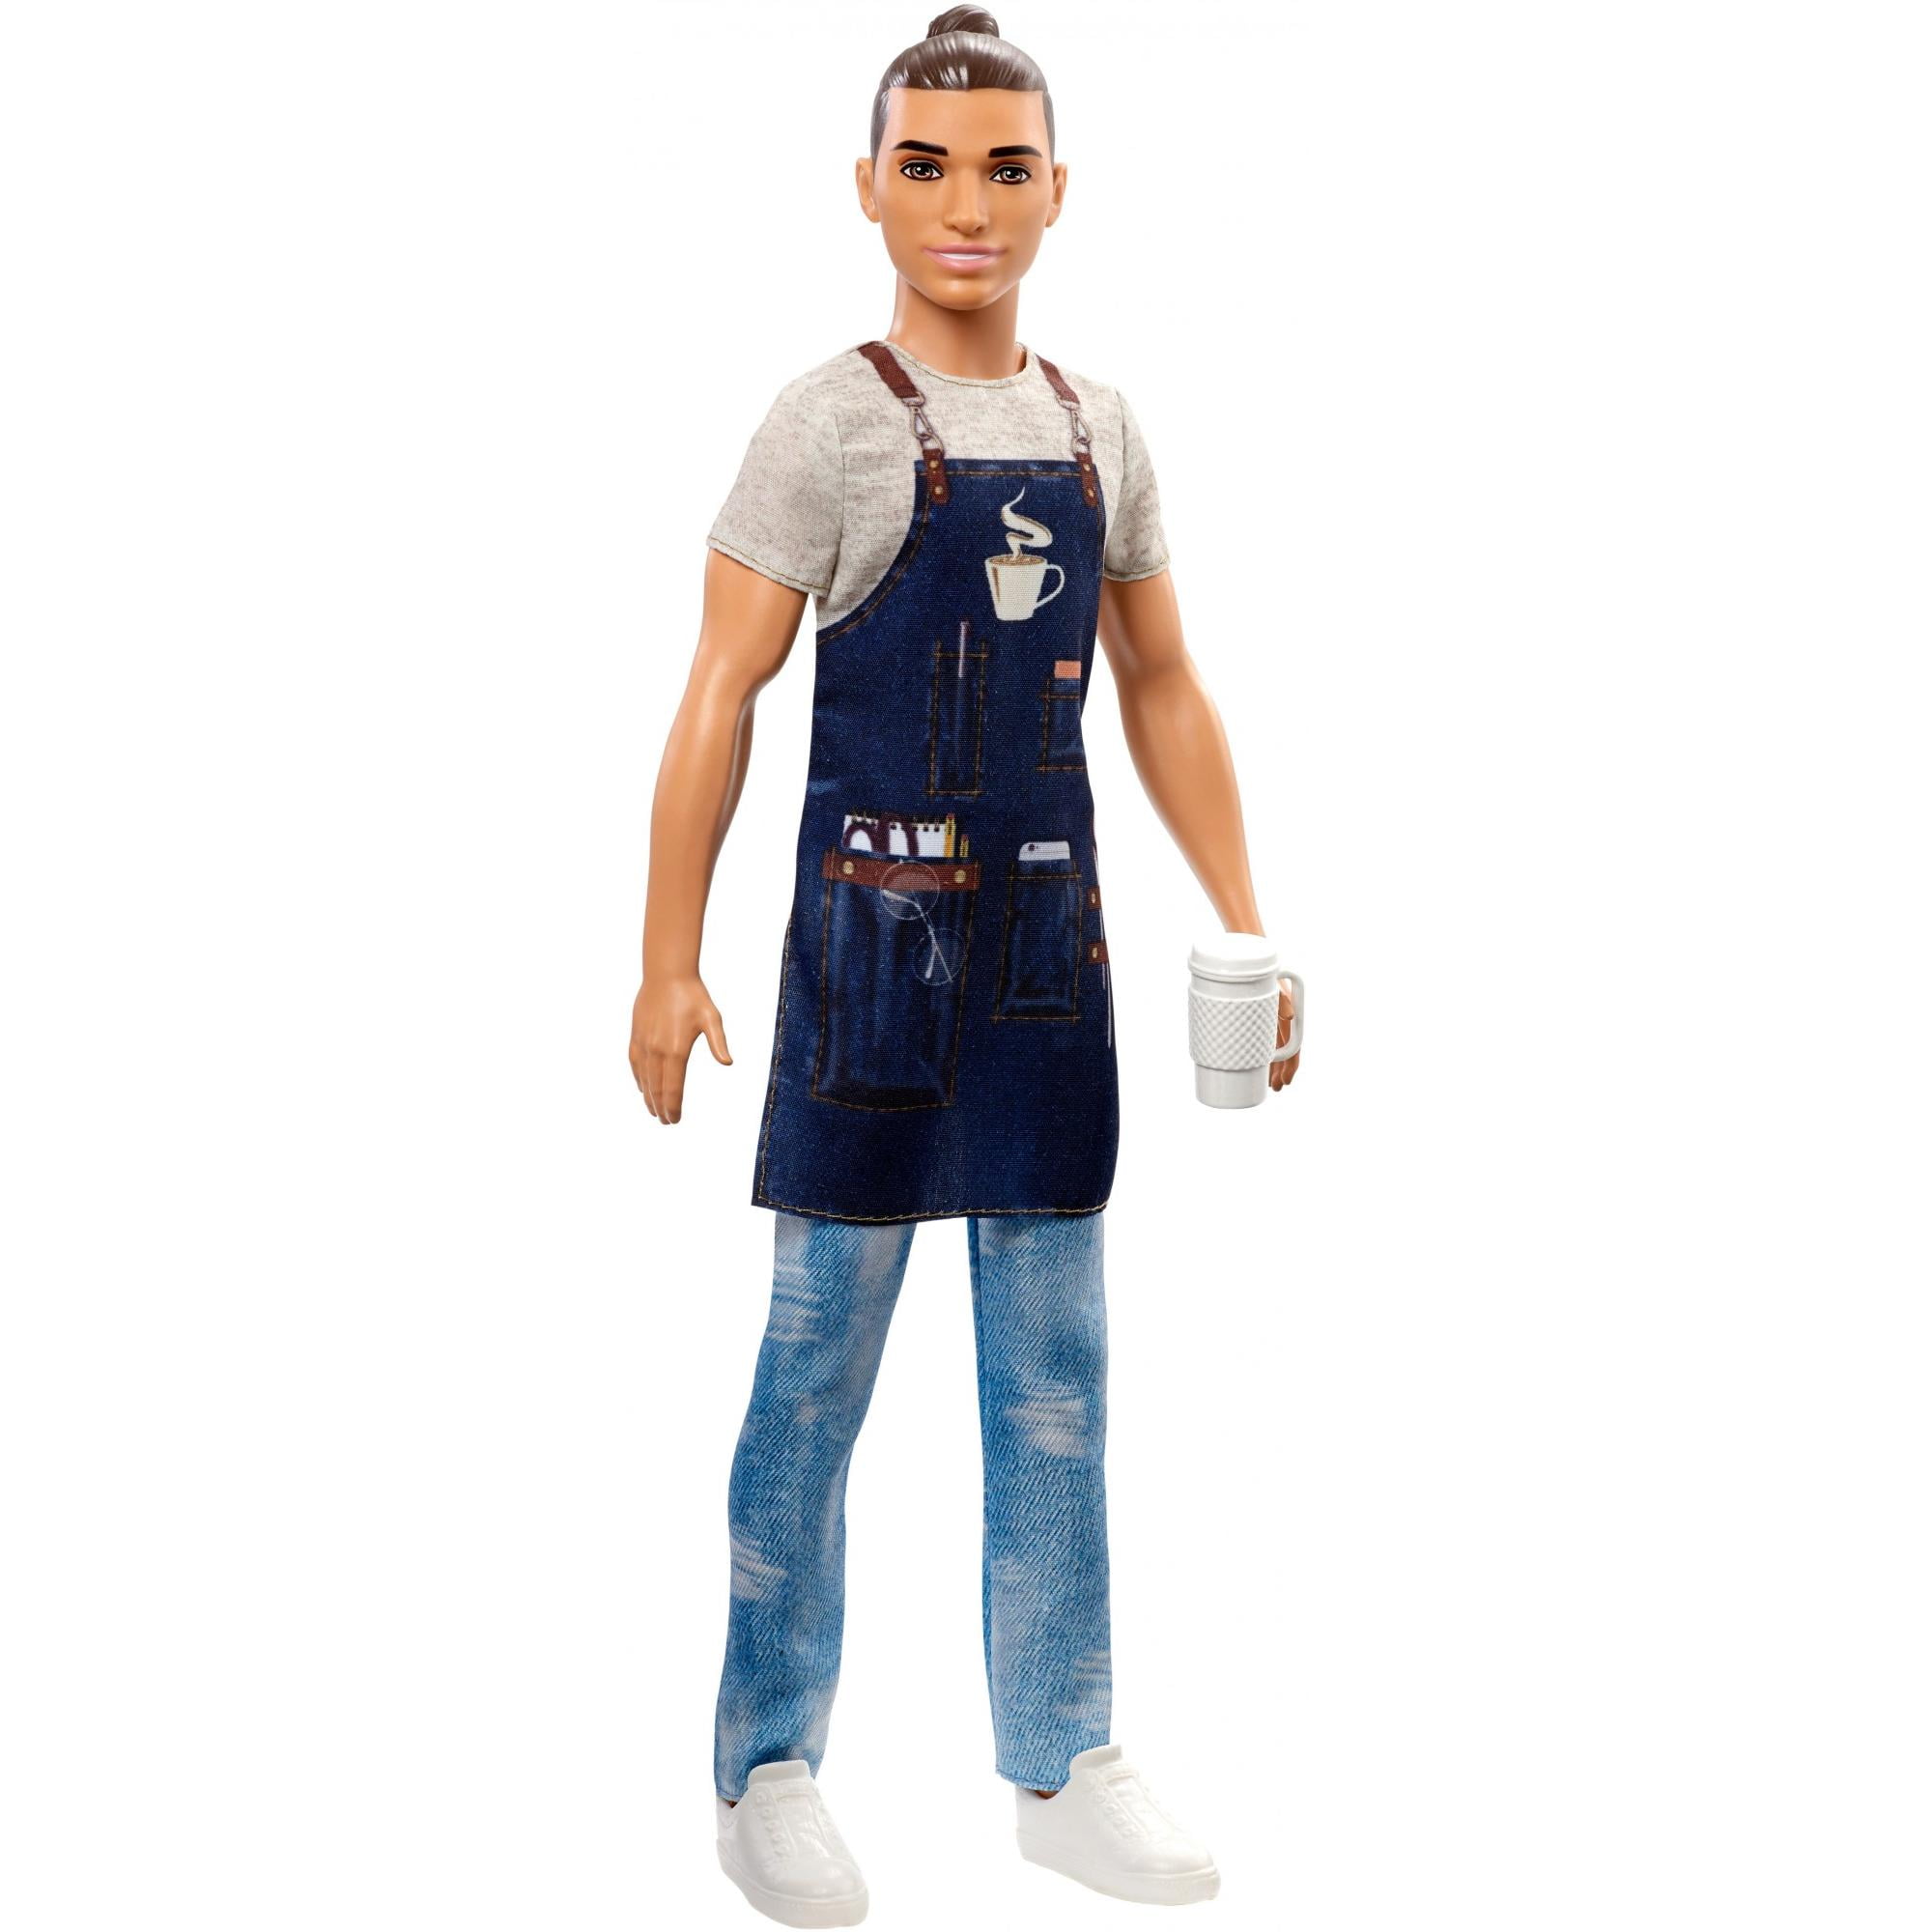 Barista Doll 3.81 x 8.89 x 30.48 cm 3-6 Yrs Details about   Barbie Career Ken For Kids Age 